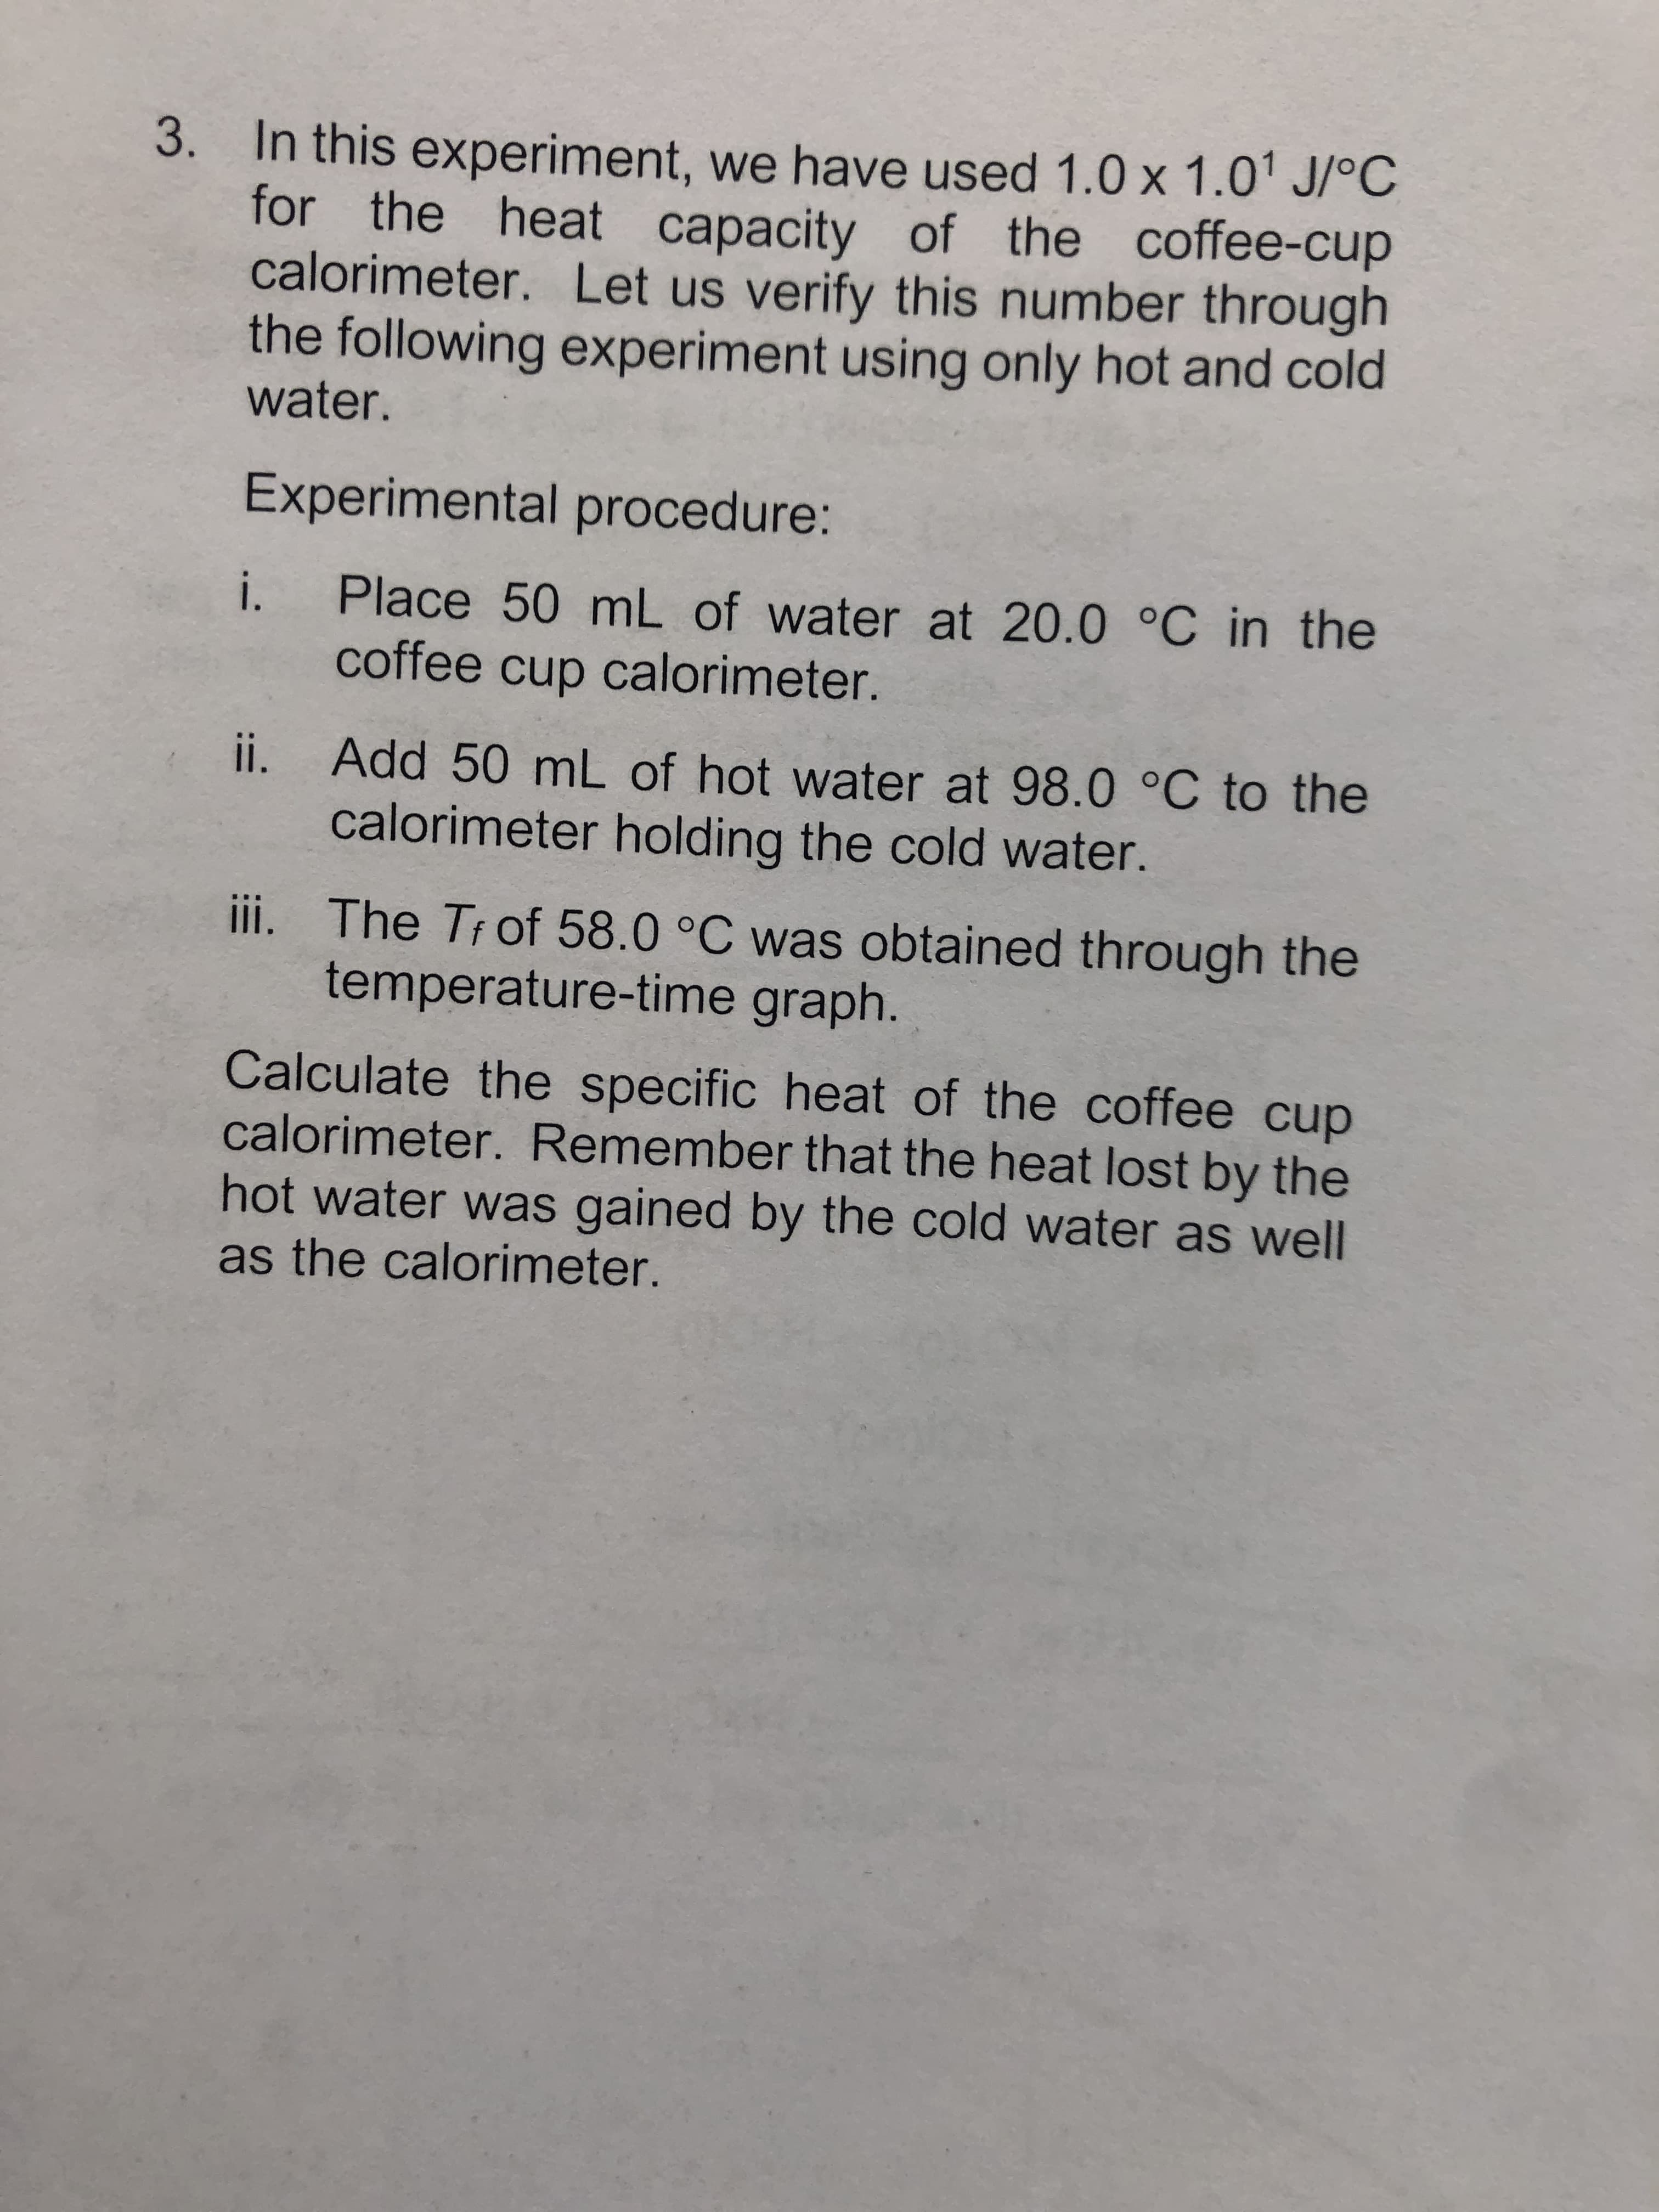 3. In this experiment, we have used 1.0 x 1.01 J/°C
for the heat capacity of the coffee-cup
calorimeter. Let us verify this number through
the following experiment using only hot and cold
water.
Experimental procedure:
Place 50 mL of water at 20.0 °C in the
coffee cup calorimeter.
i.
ii. Add 50 mL of hot water at 98.0 °C to the
calorimeter holding the cold water.
ii. The Trof 58.0 °C was obtained through the
temperature-time graph.
Calculate the specific heat of the coffee cup
calorimeter. Remember that the heat lost by the
hot water was gained by the cold water as well
as the calorimeter.
